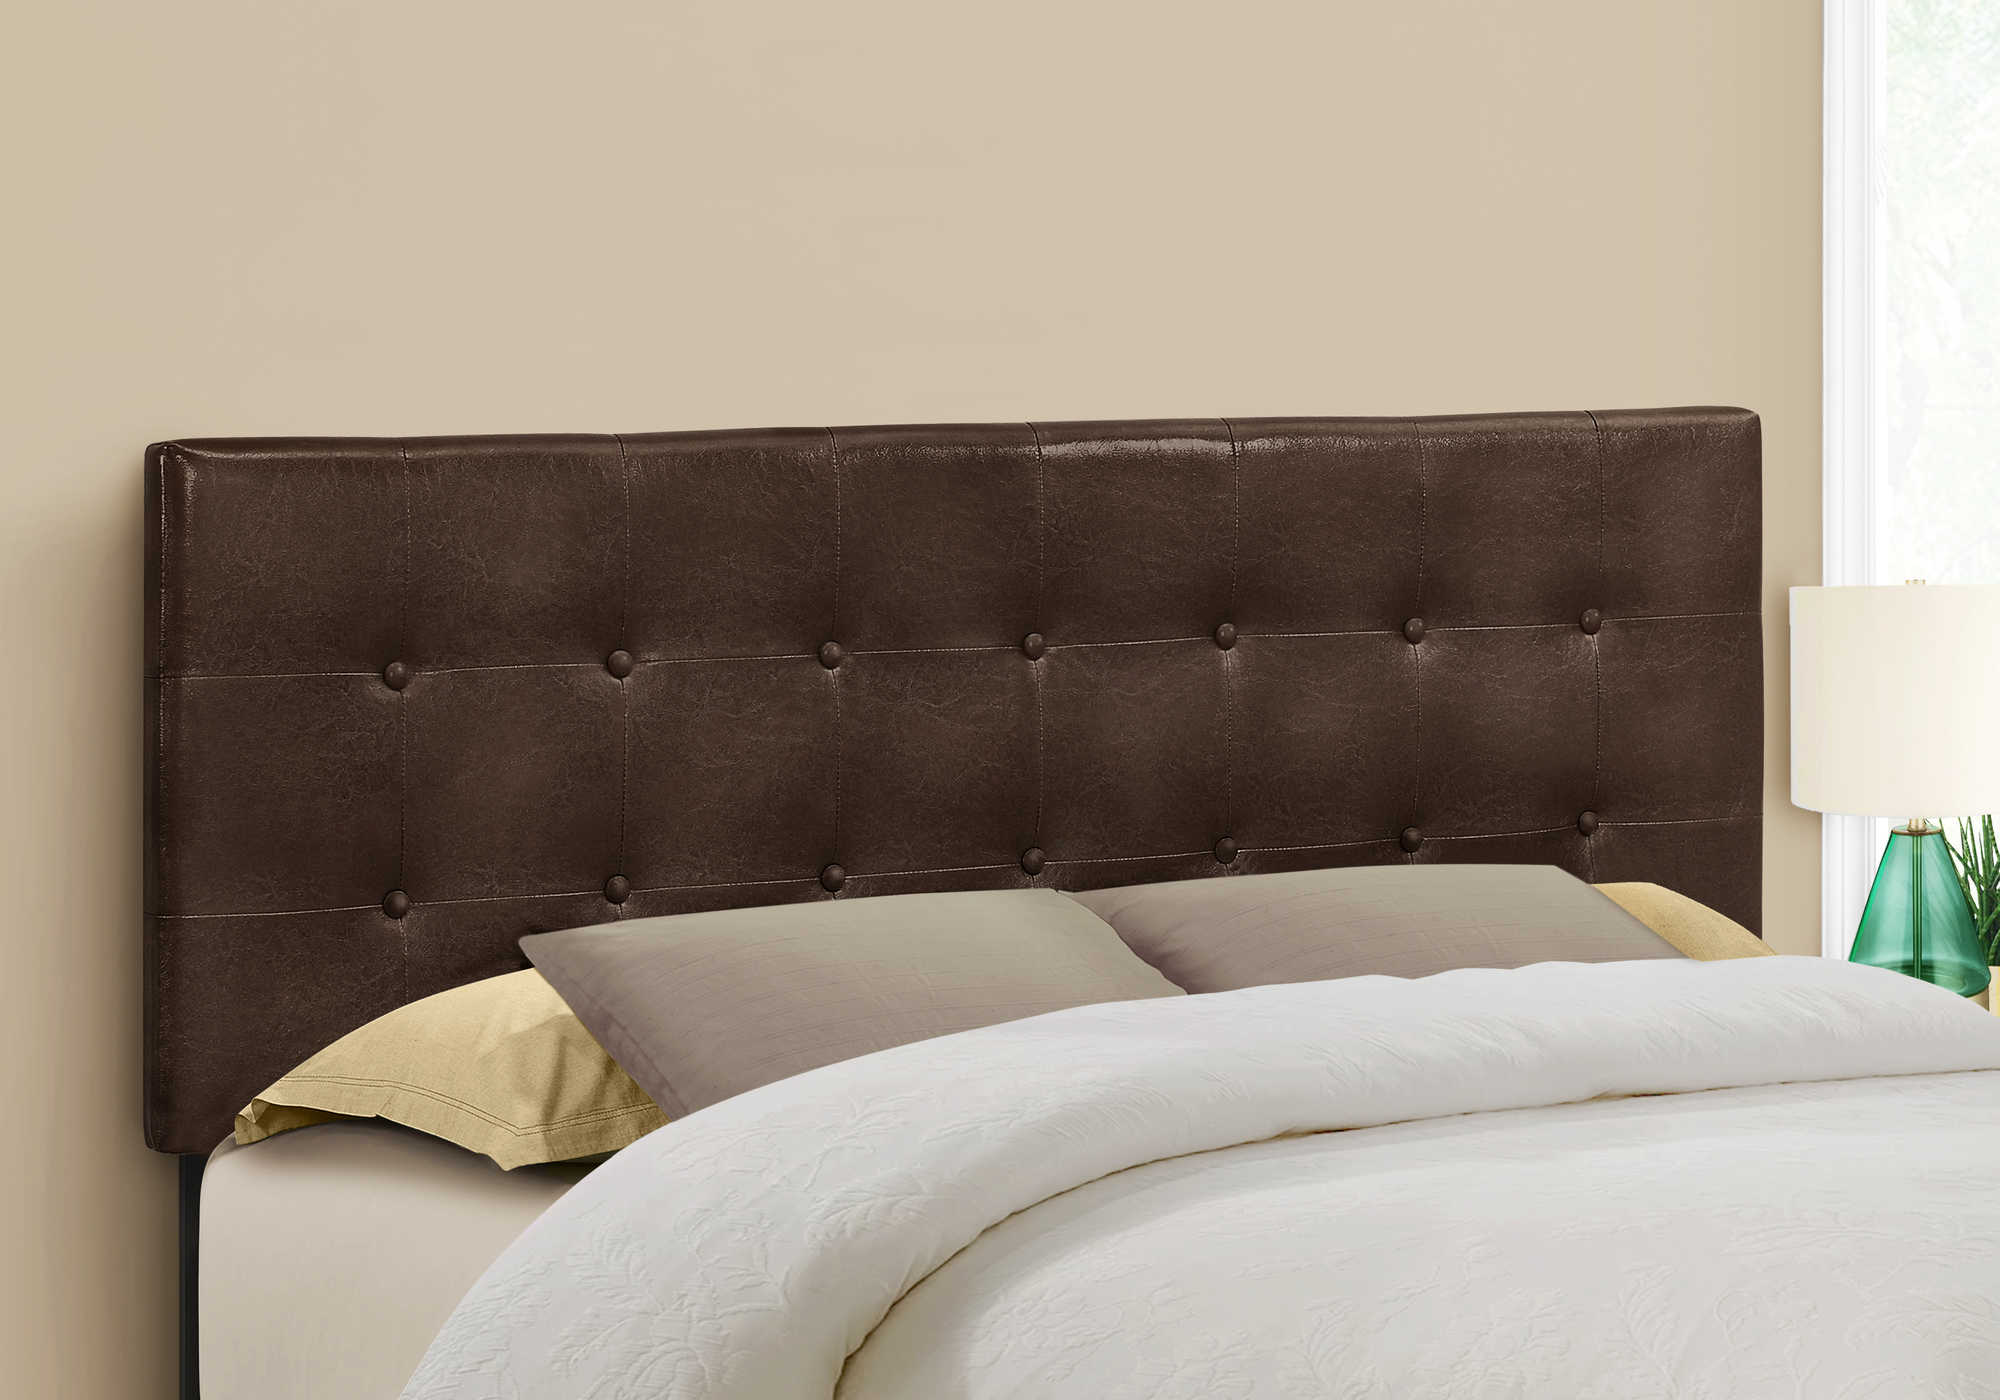 BED - QUEEN SIZE / BROWN LEATHER-LOOK HEADBOARD ONLY